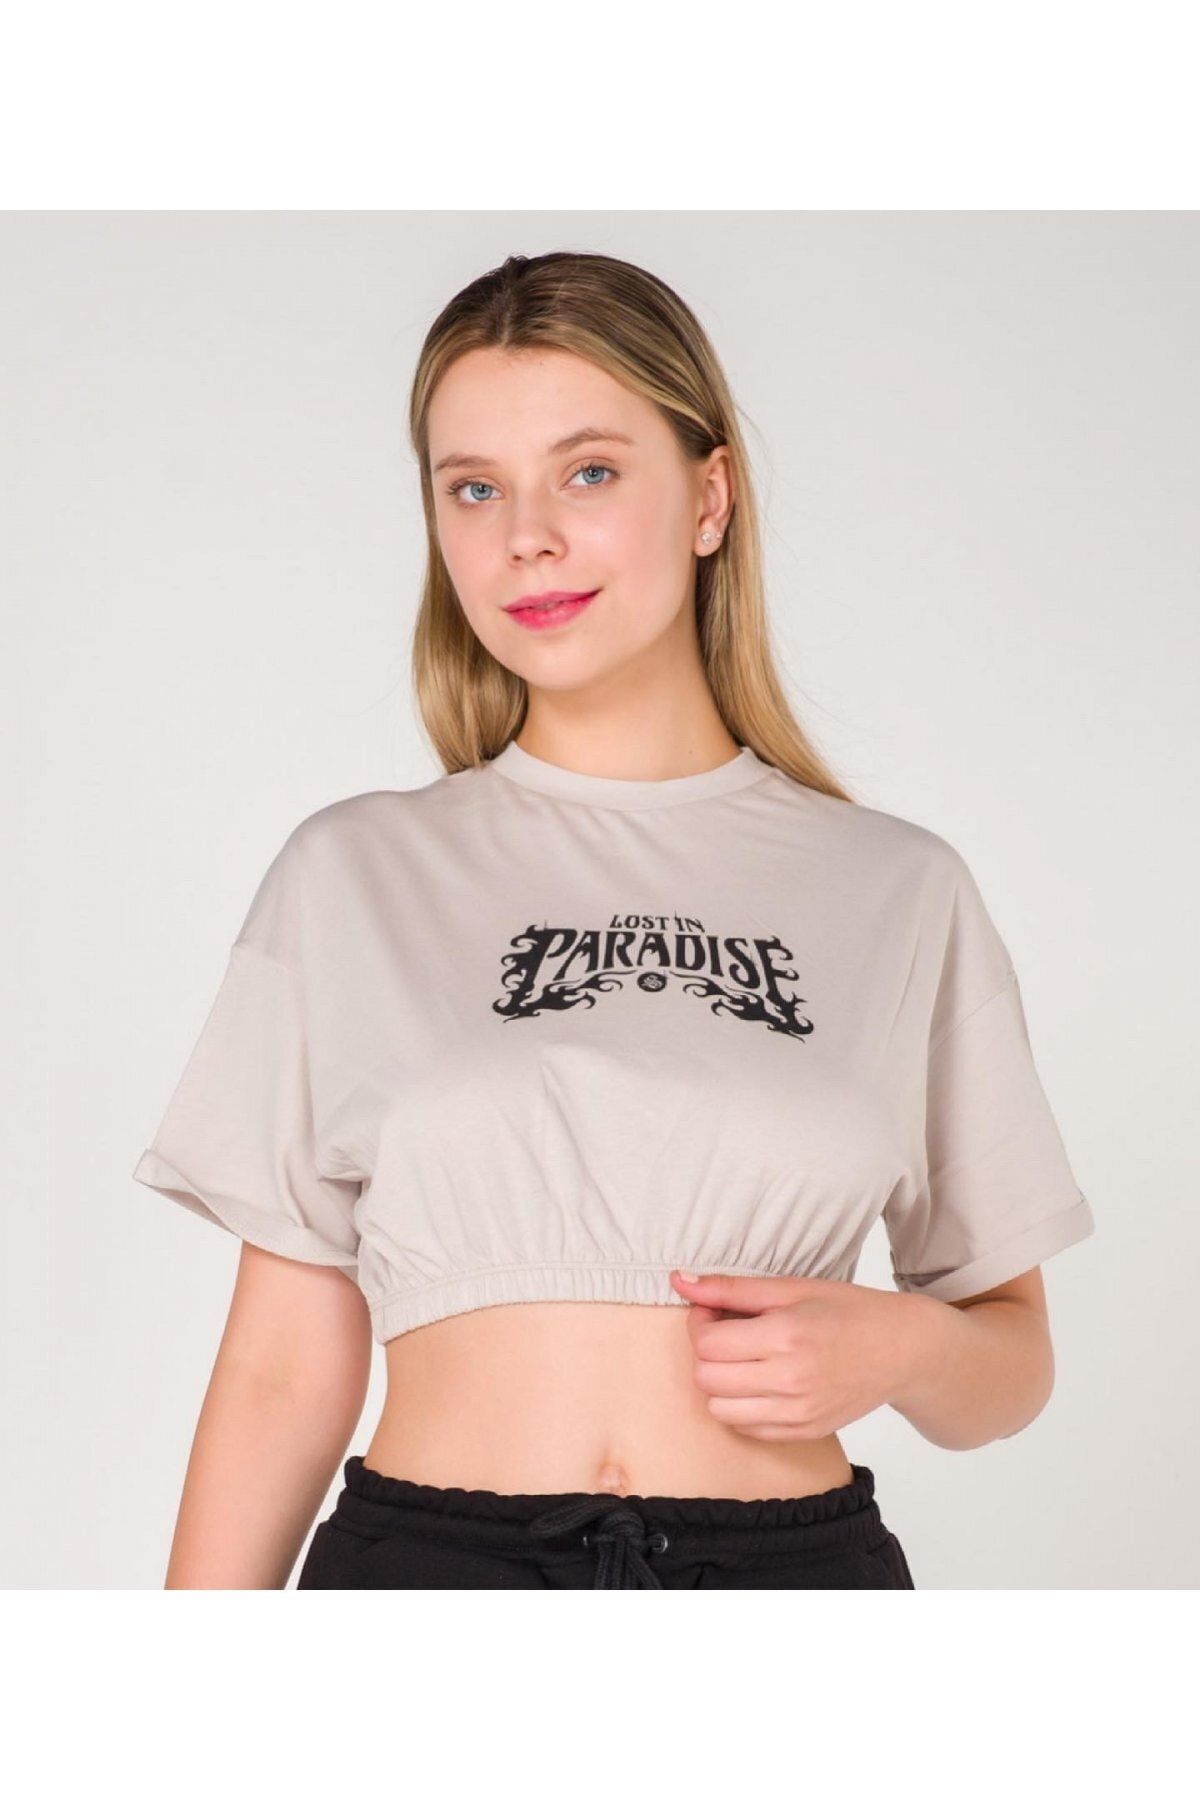 Shout Woman Oversize Lost In Paradise Crop Top